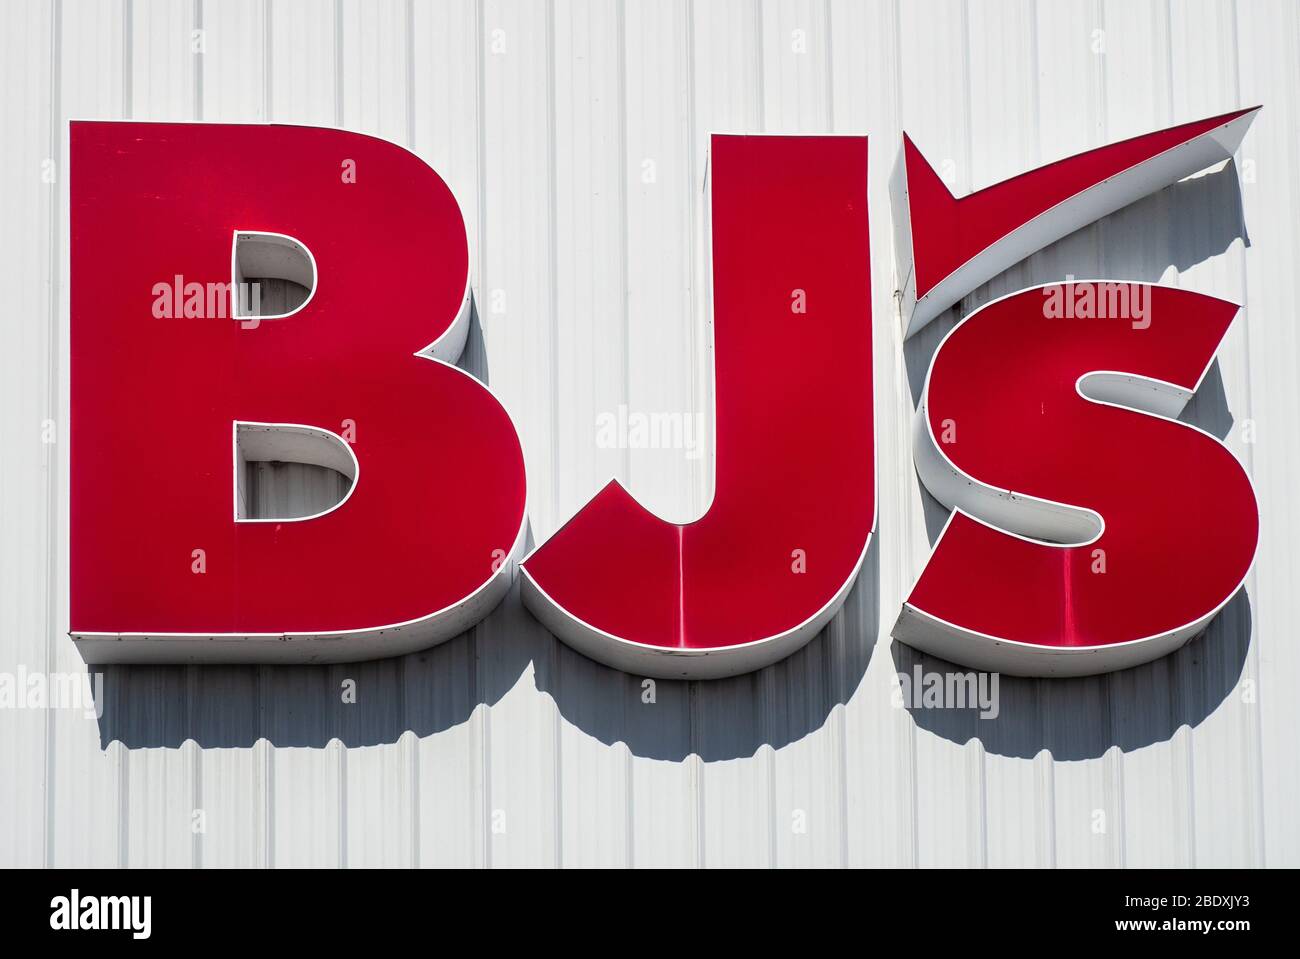 https://c8.alamy.com/comp/2BDXJY3/clay-new-york-usa-april-10-2020-exterior-wall-with-the-bjs-logo-at-a-bjs-wholesale-club-in-clay-ny-2BDXJY3.jpg